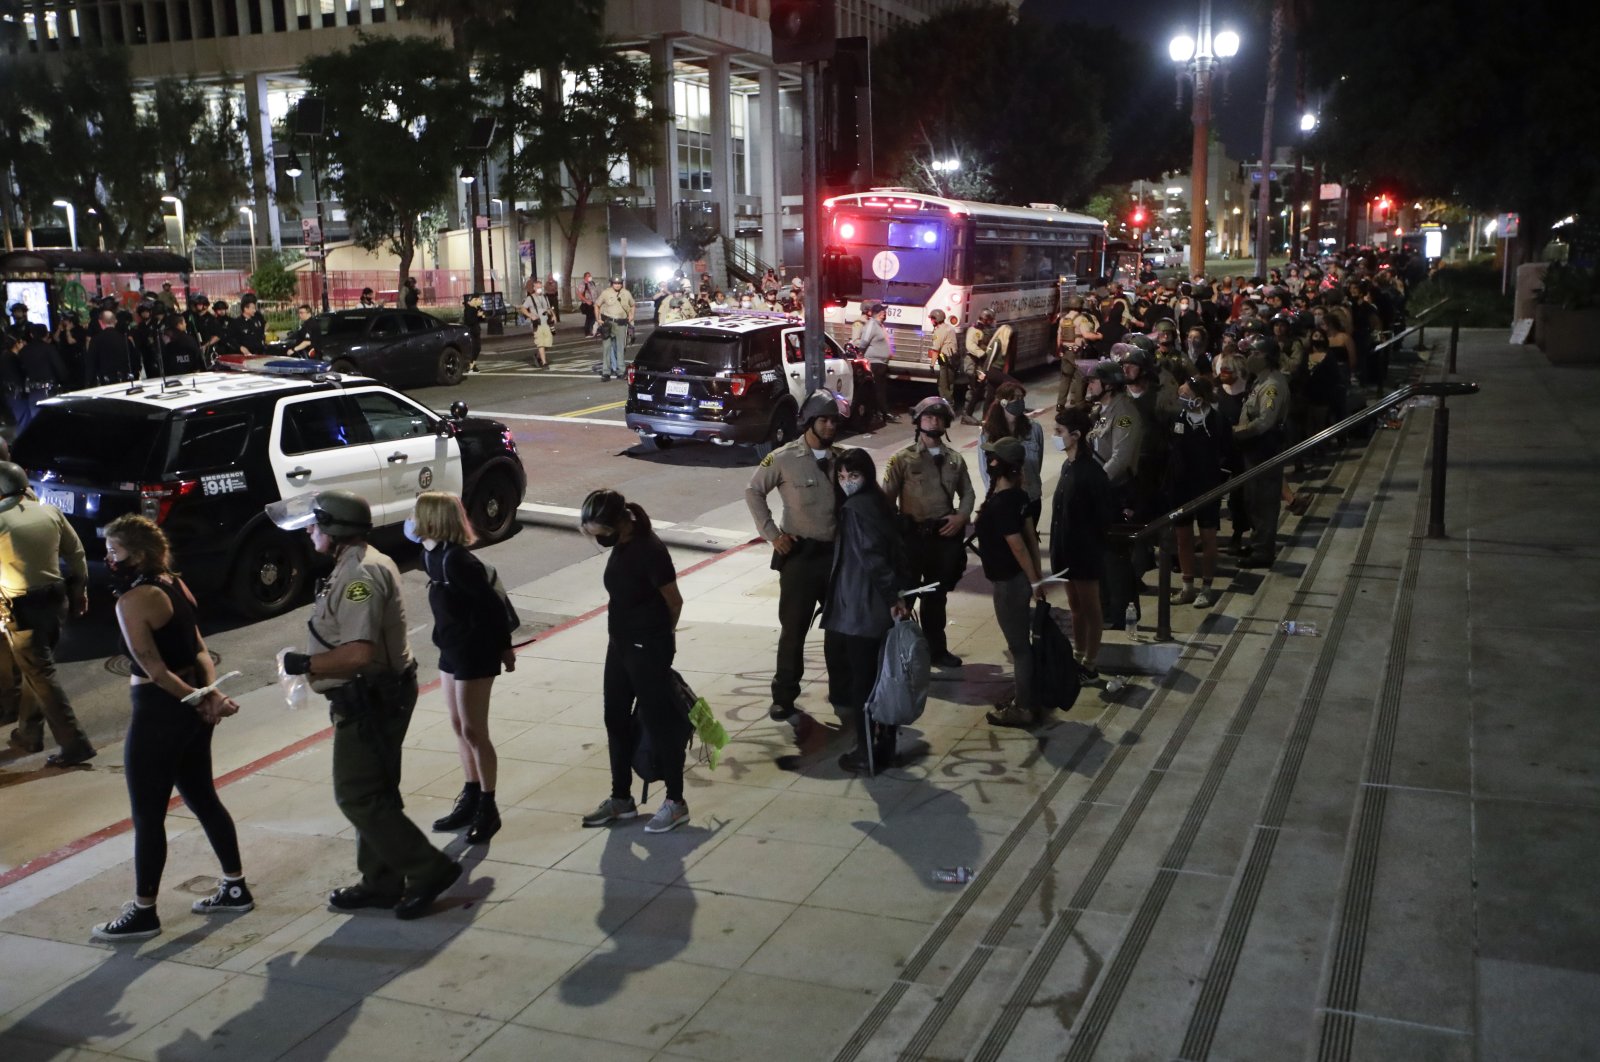 Demonstrators are arrested for a curfew violation, Los Angeles, California, U.S., June 3, 2020. (AP Photo)